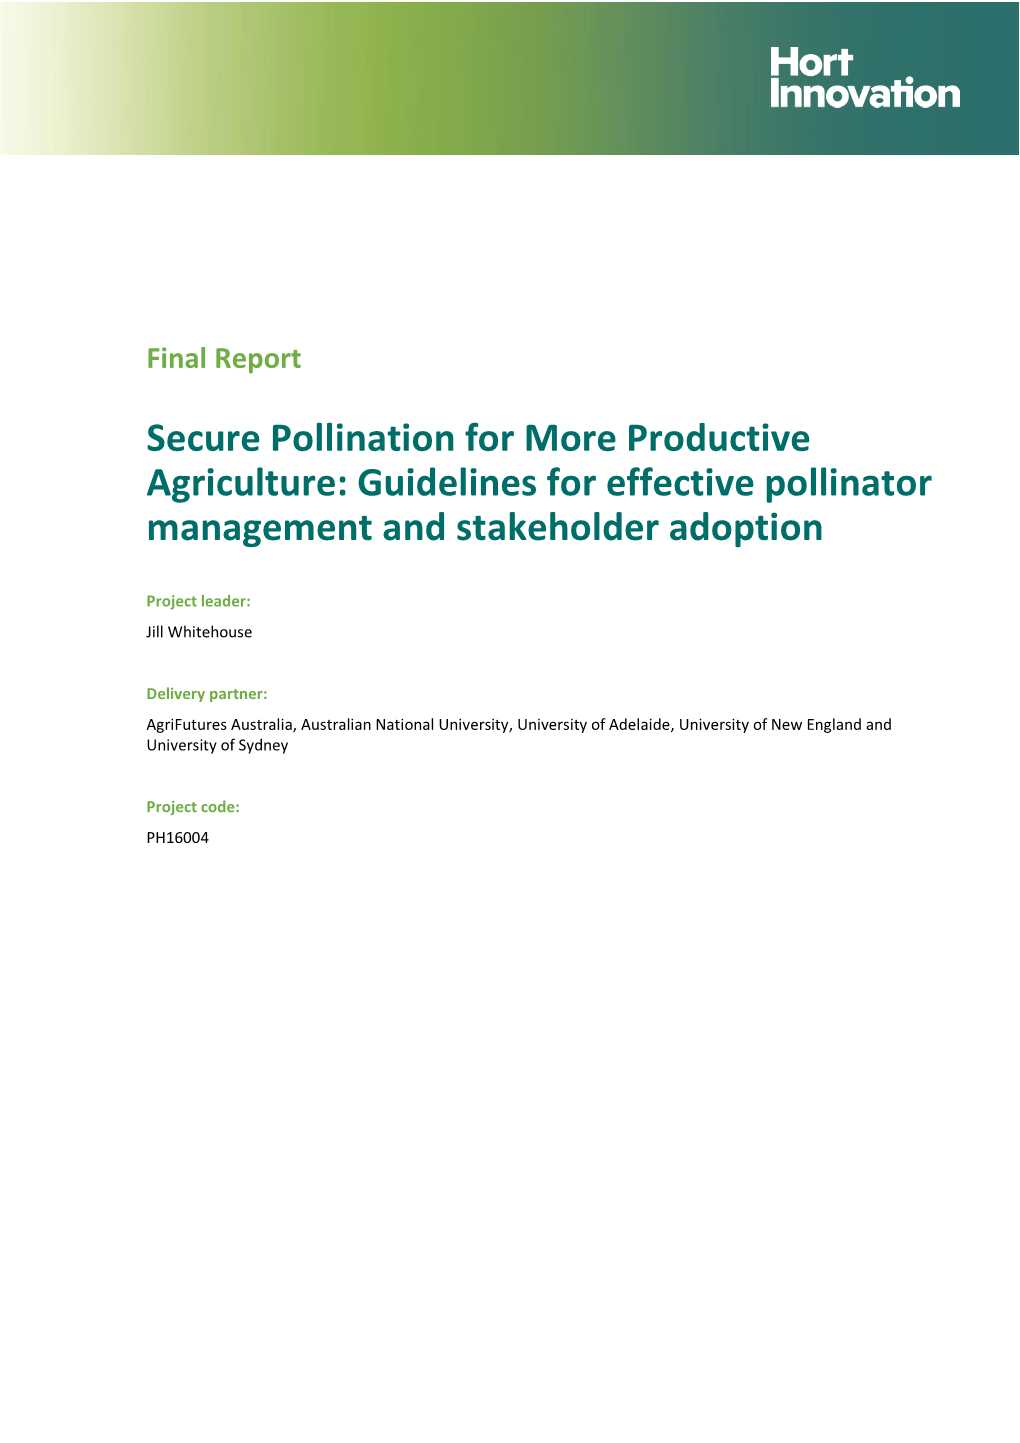 Secure Pollination for More Productive Agriculture: Guidelines for Effective Pollinator Management and Stakeholder Adoption